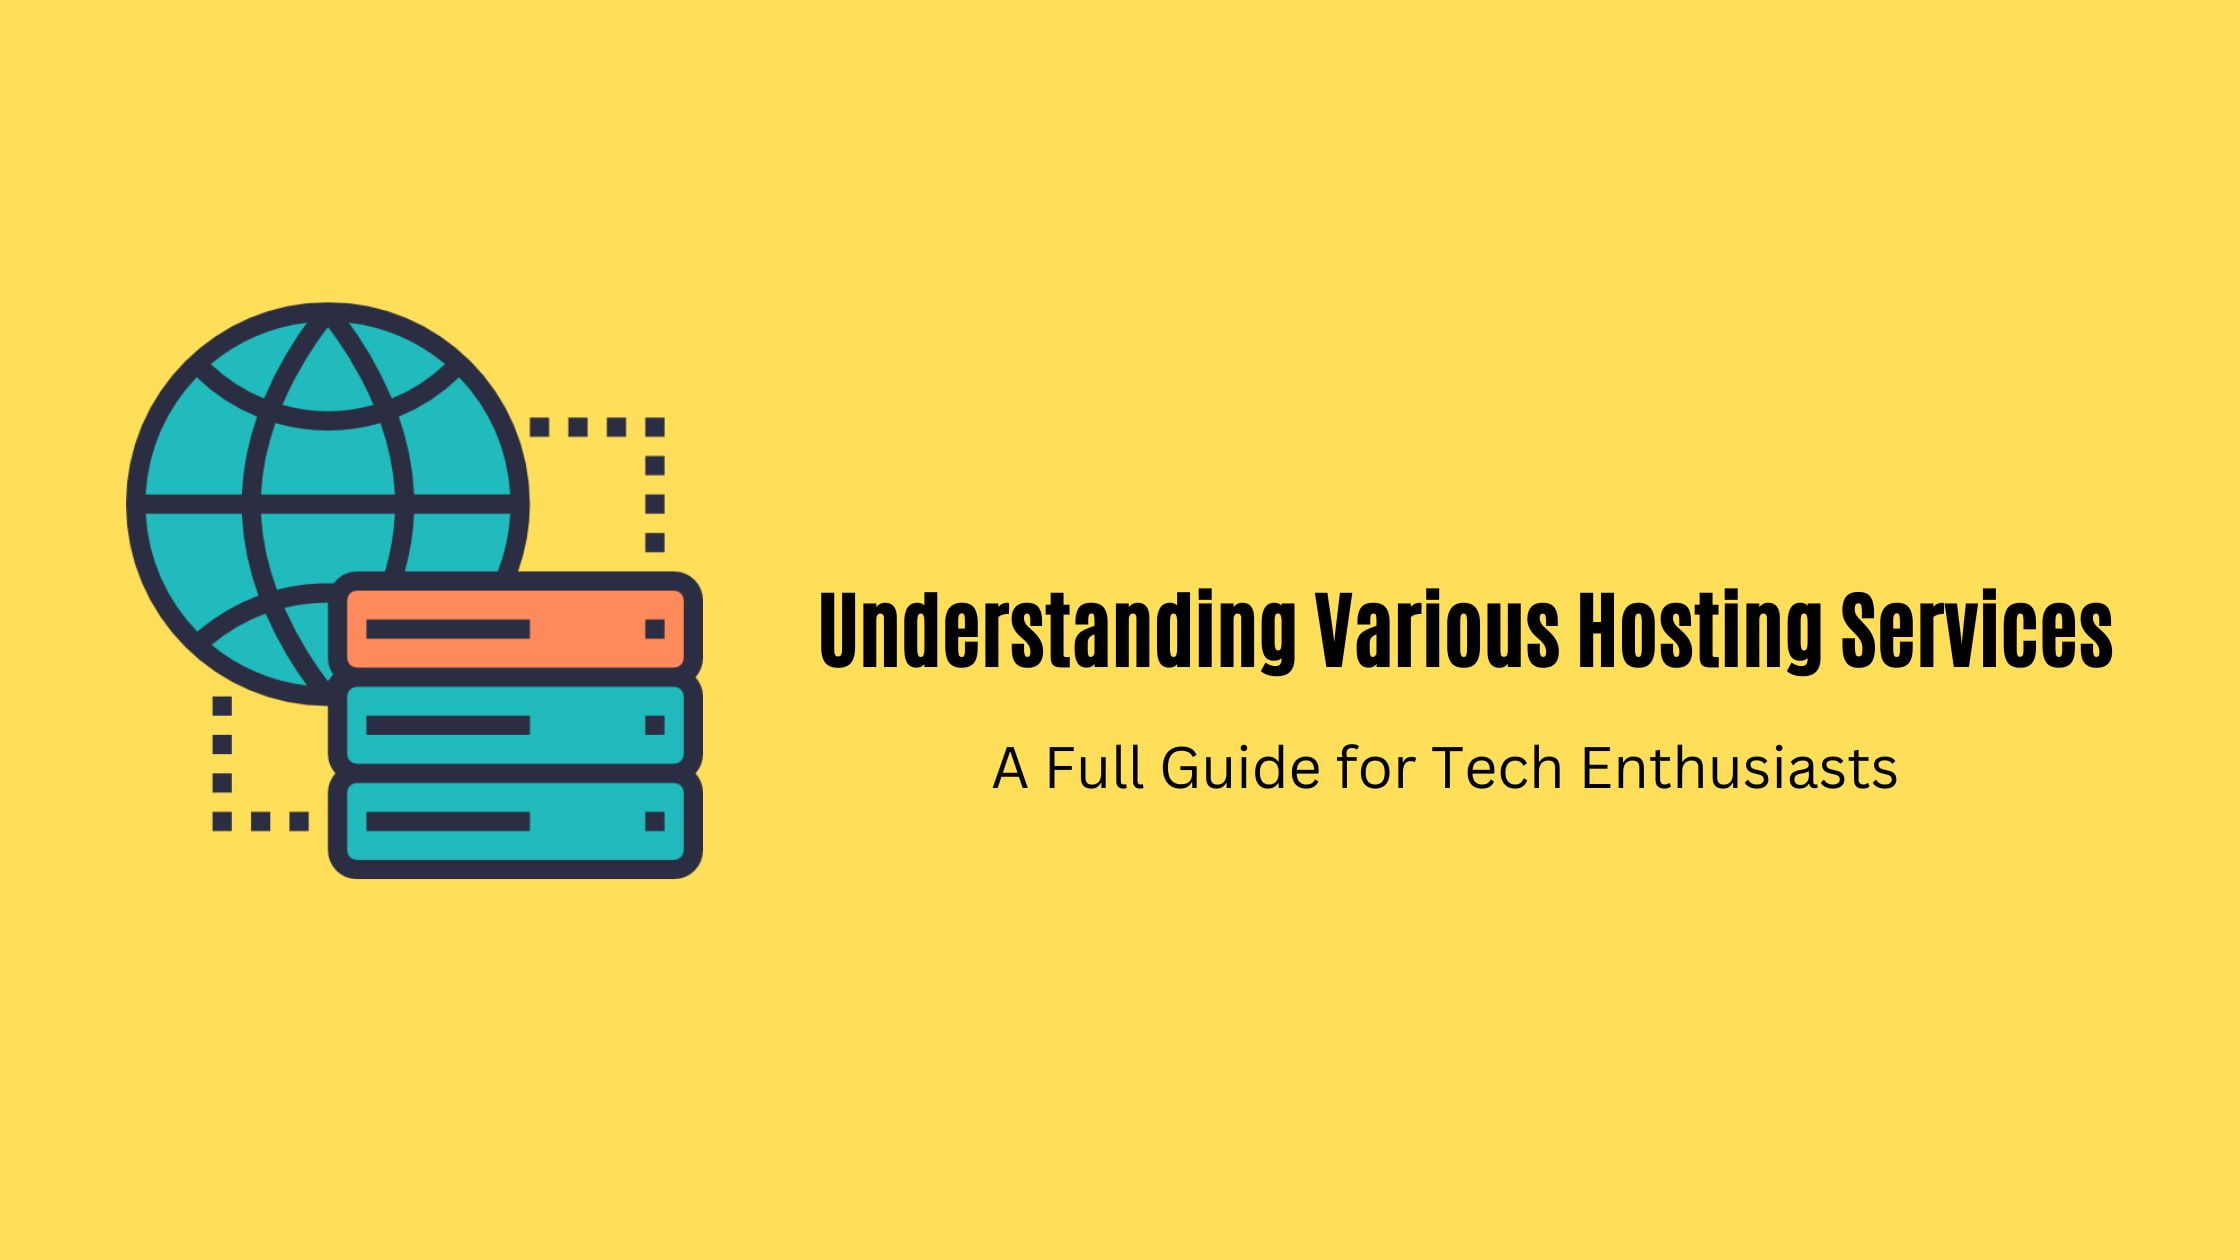 Understanding Various Hosting Services: A Full Guide for Tech Enthusiasts